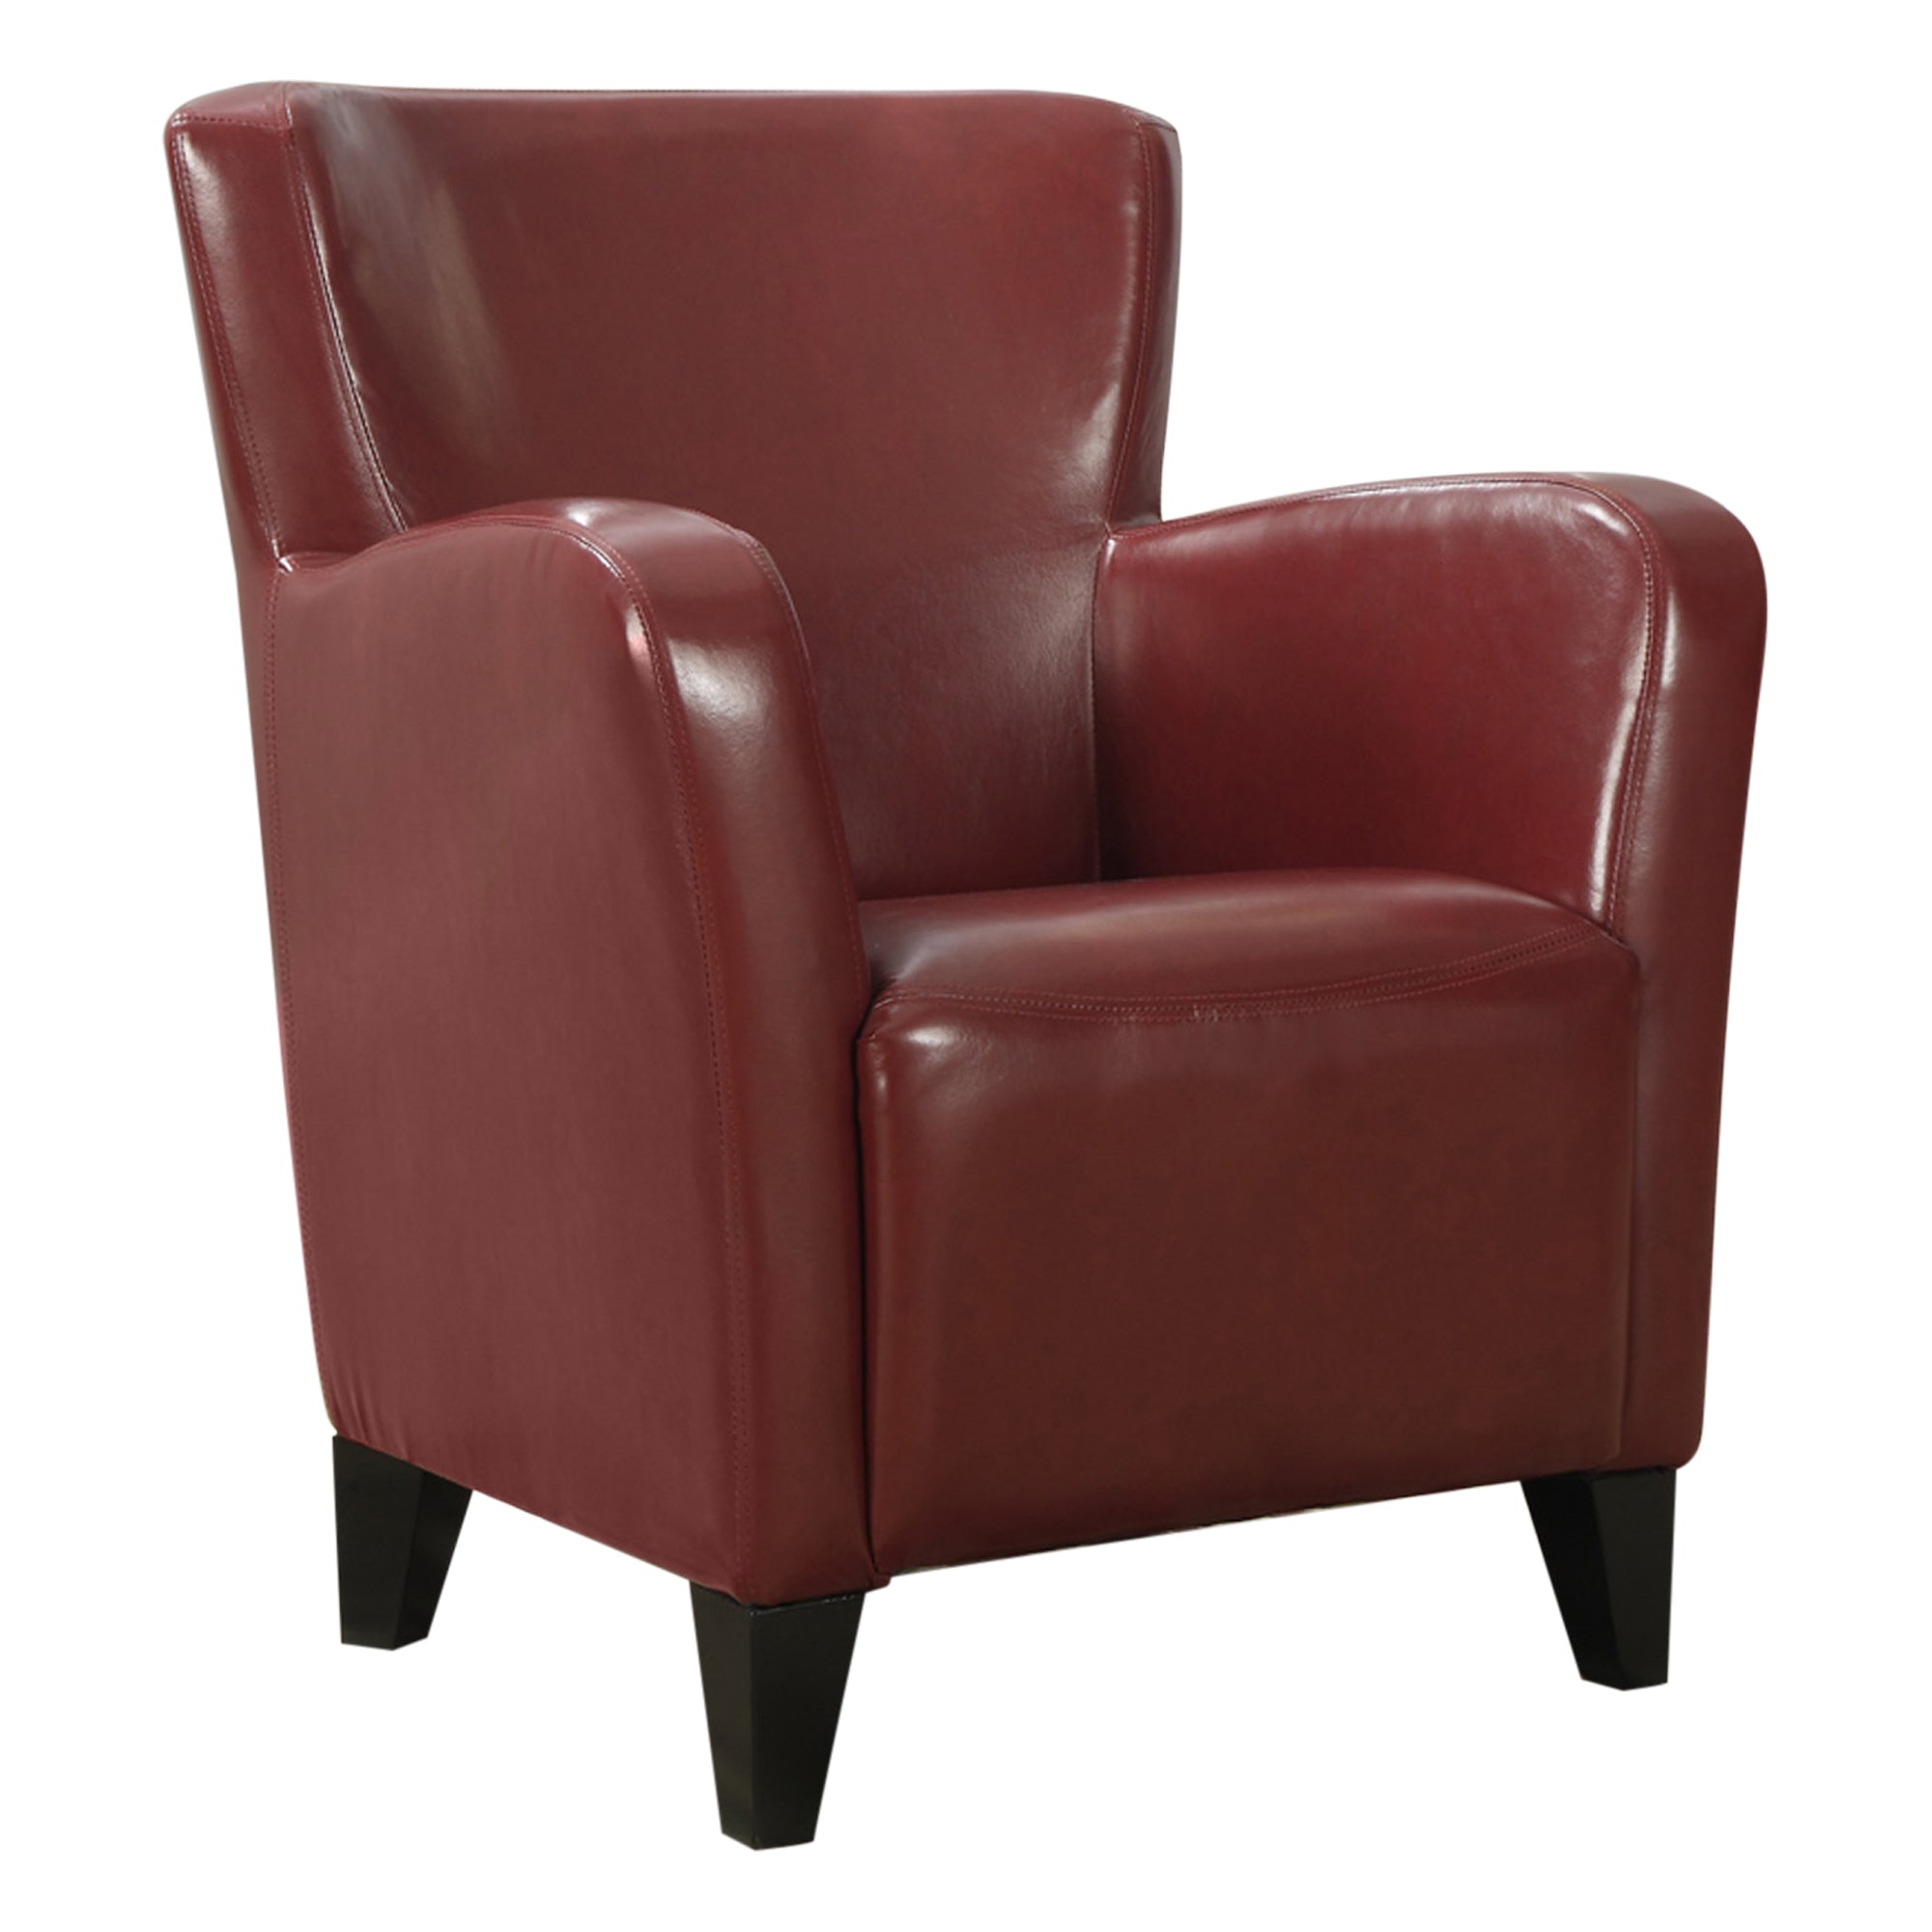 Accent Chair - Red Leather-Look Fabric